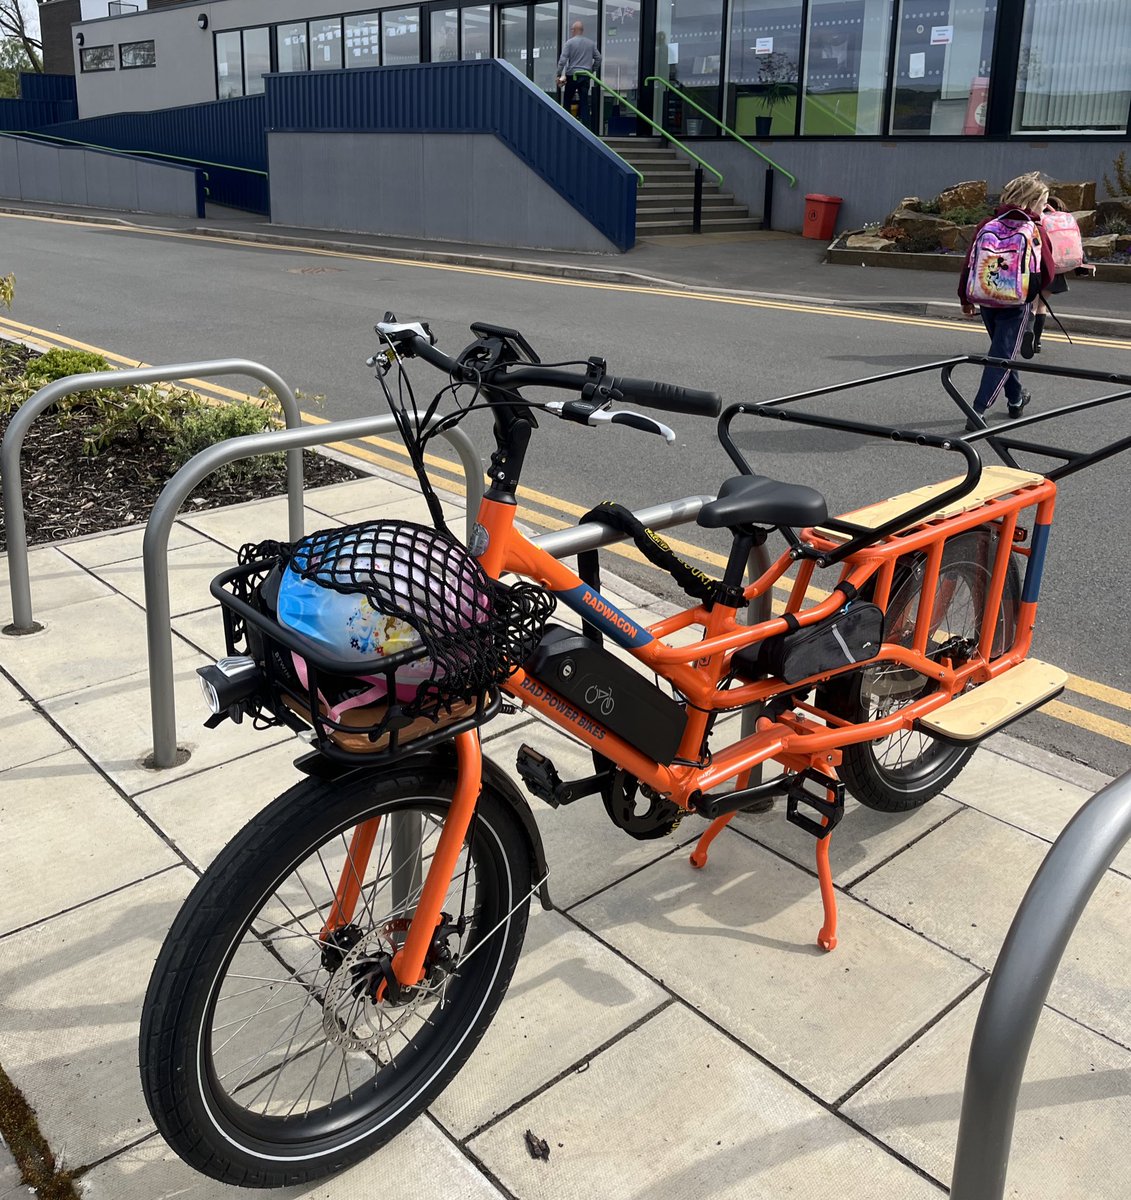 One week in. 40 ish miles done. Key things we’ve learned 1) hills with a “full load” are hard. Even with a battery 2) the heavy duty lock click-clacks on the basket 3) it is a lot of fun! #FamilyCycling #CargoBikeAdventures #SheffieldIsSuper #Radwagon4